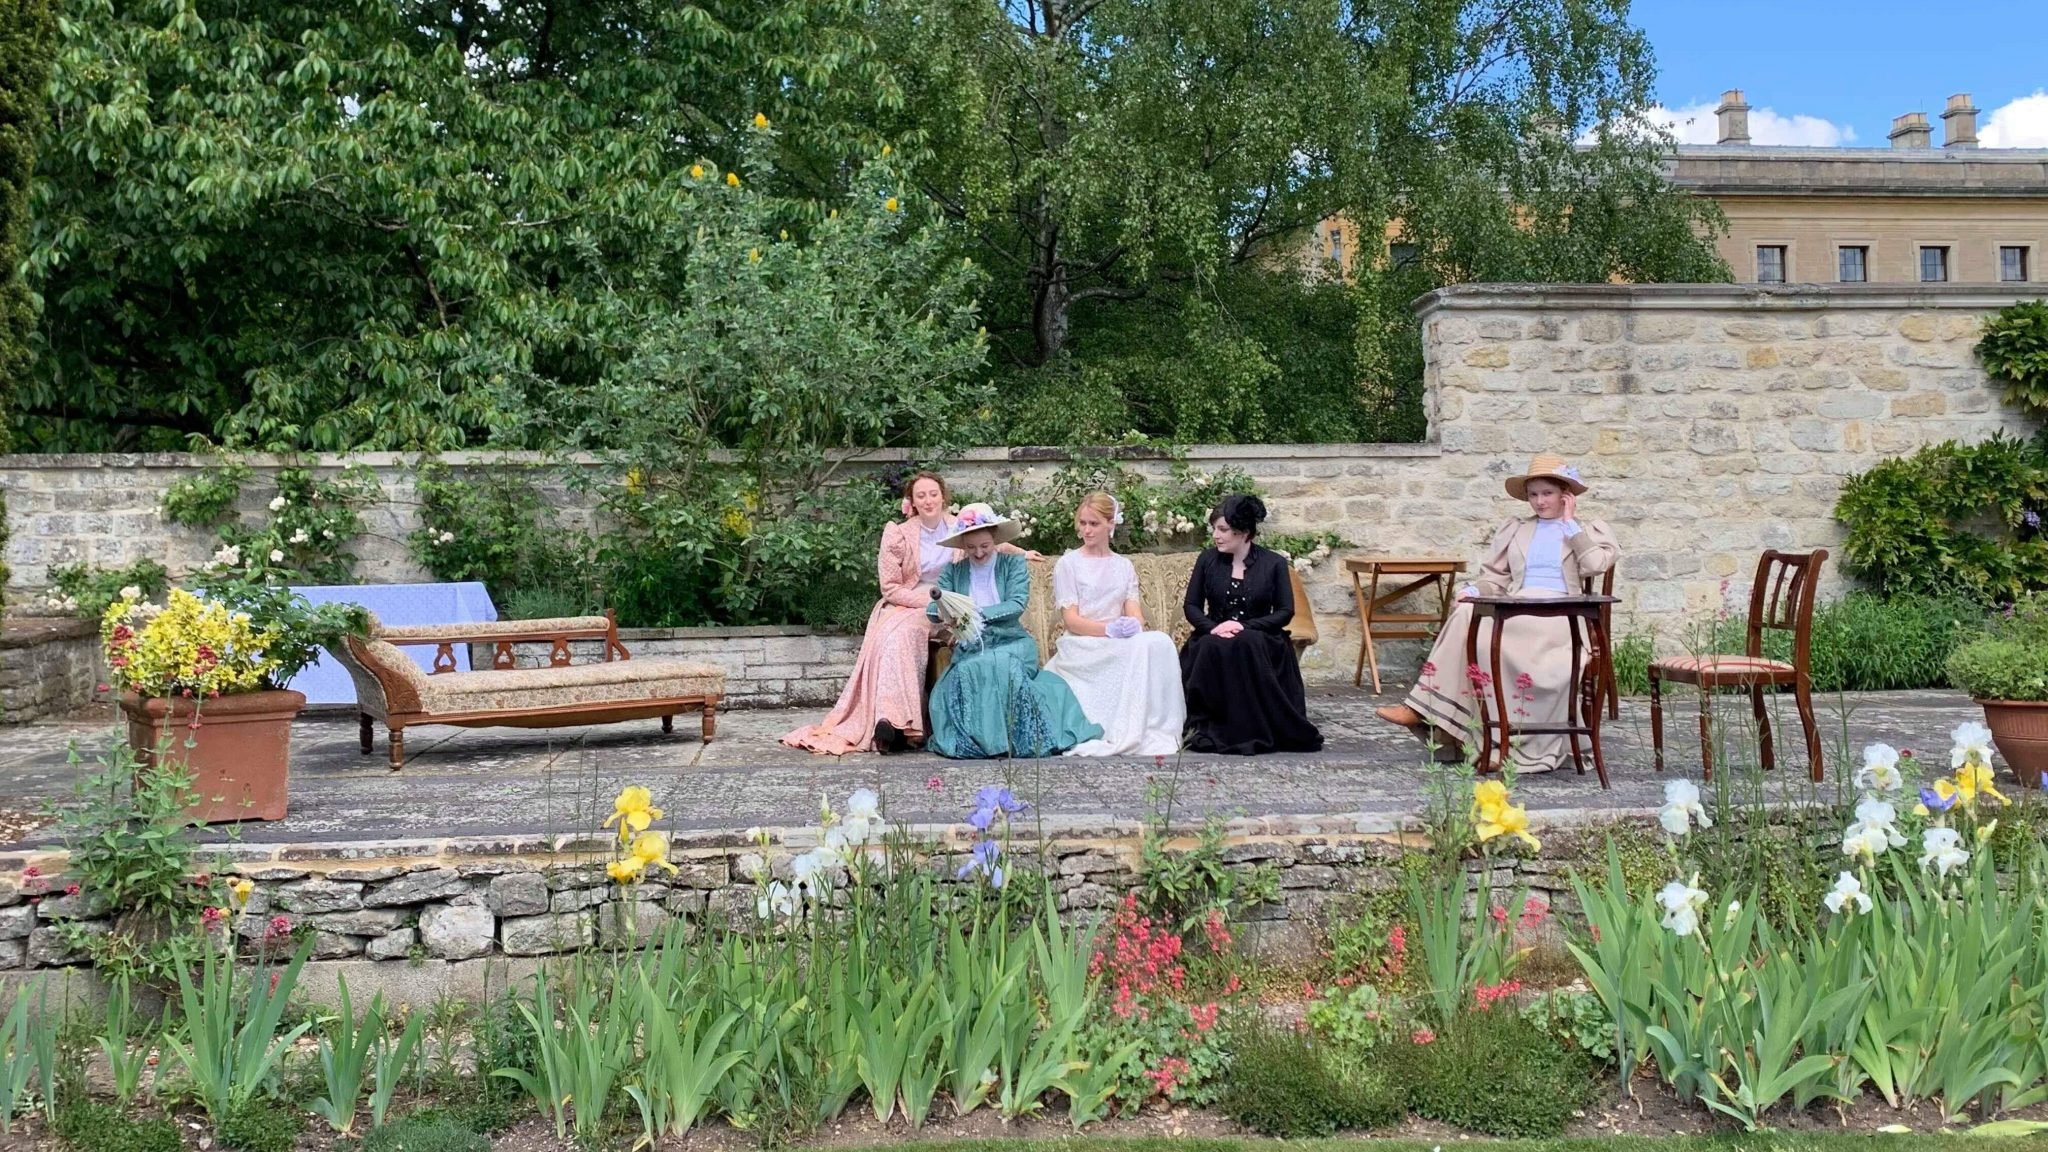 five woman dressed in old-fashioned upper class dresses sitting in a garden setting; there is a chaise long, a sofa and a table with chairs